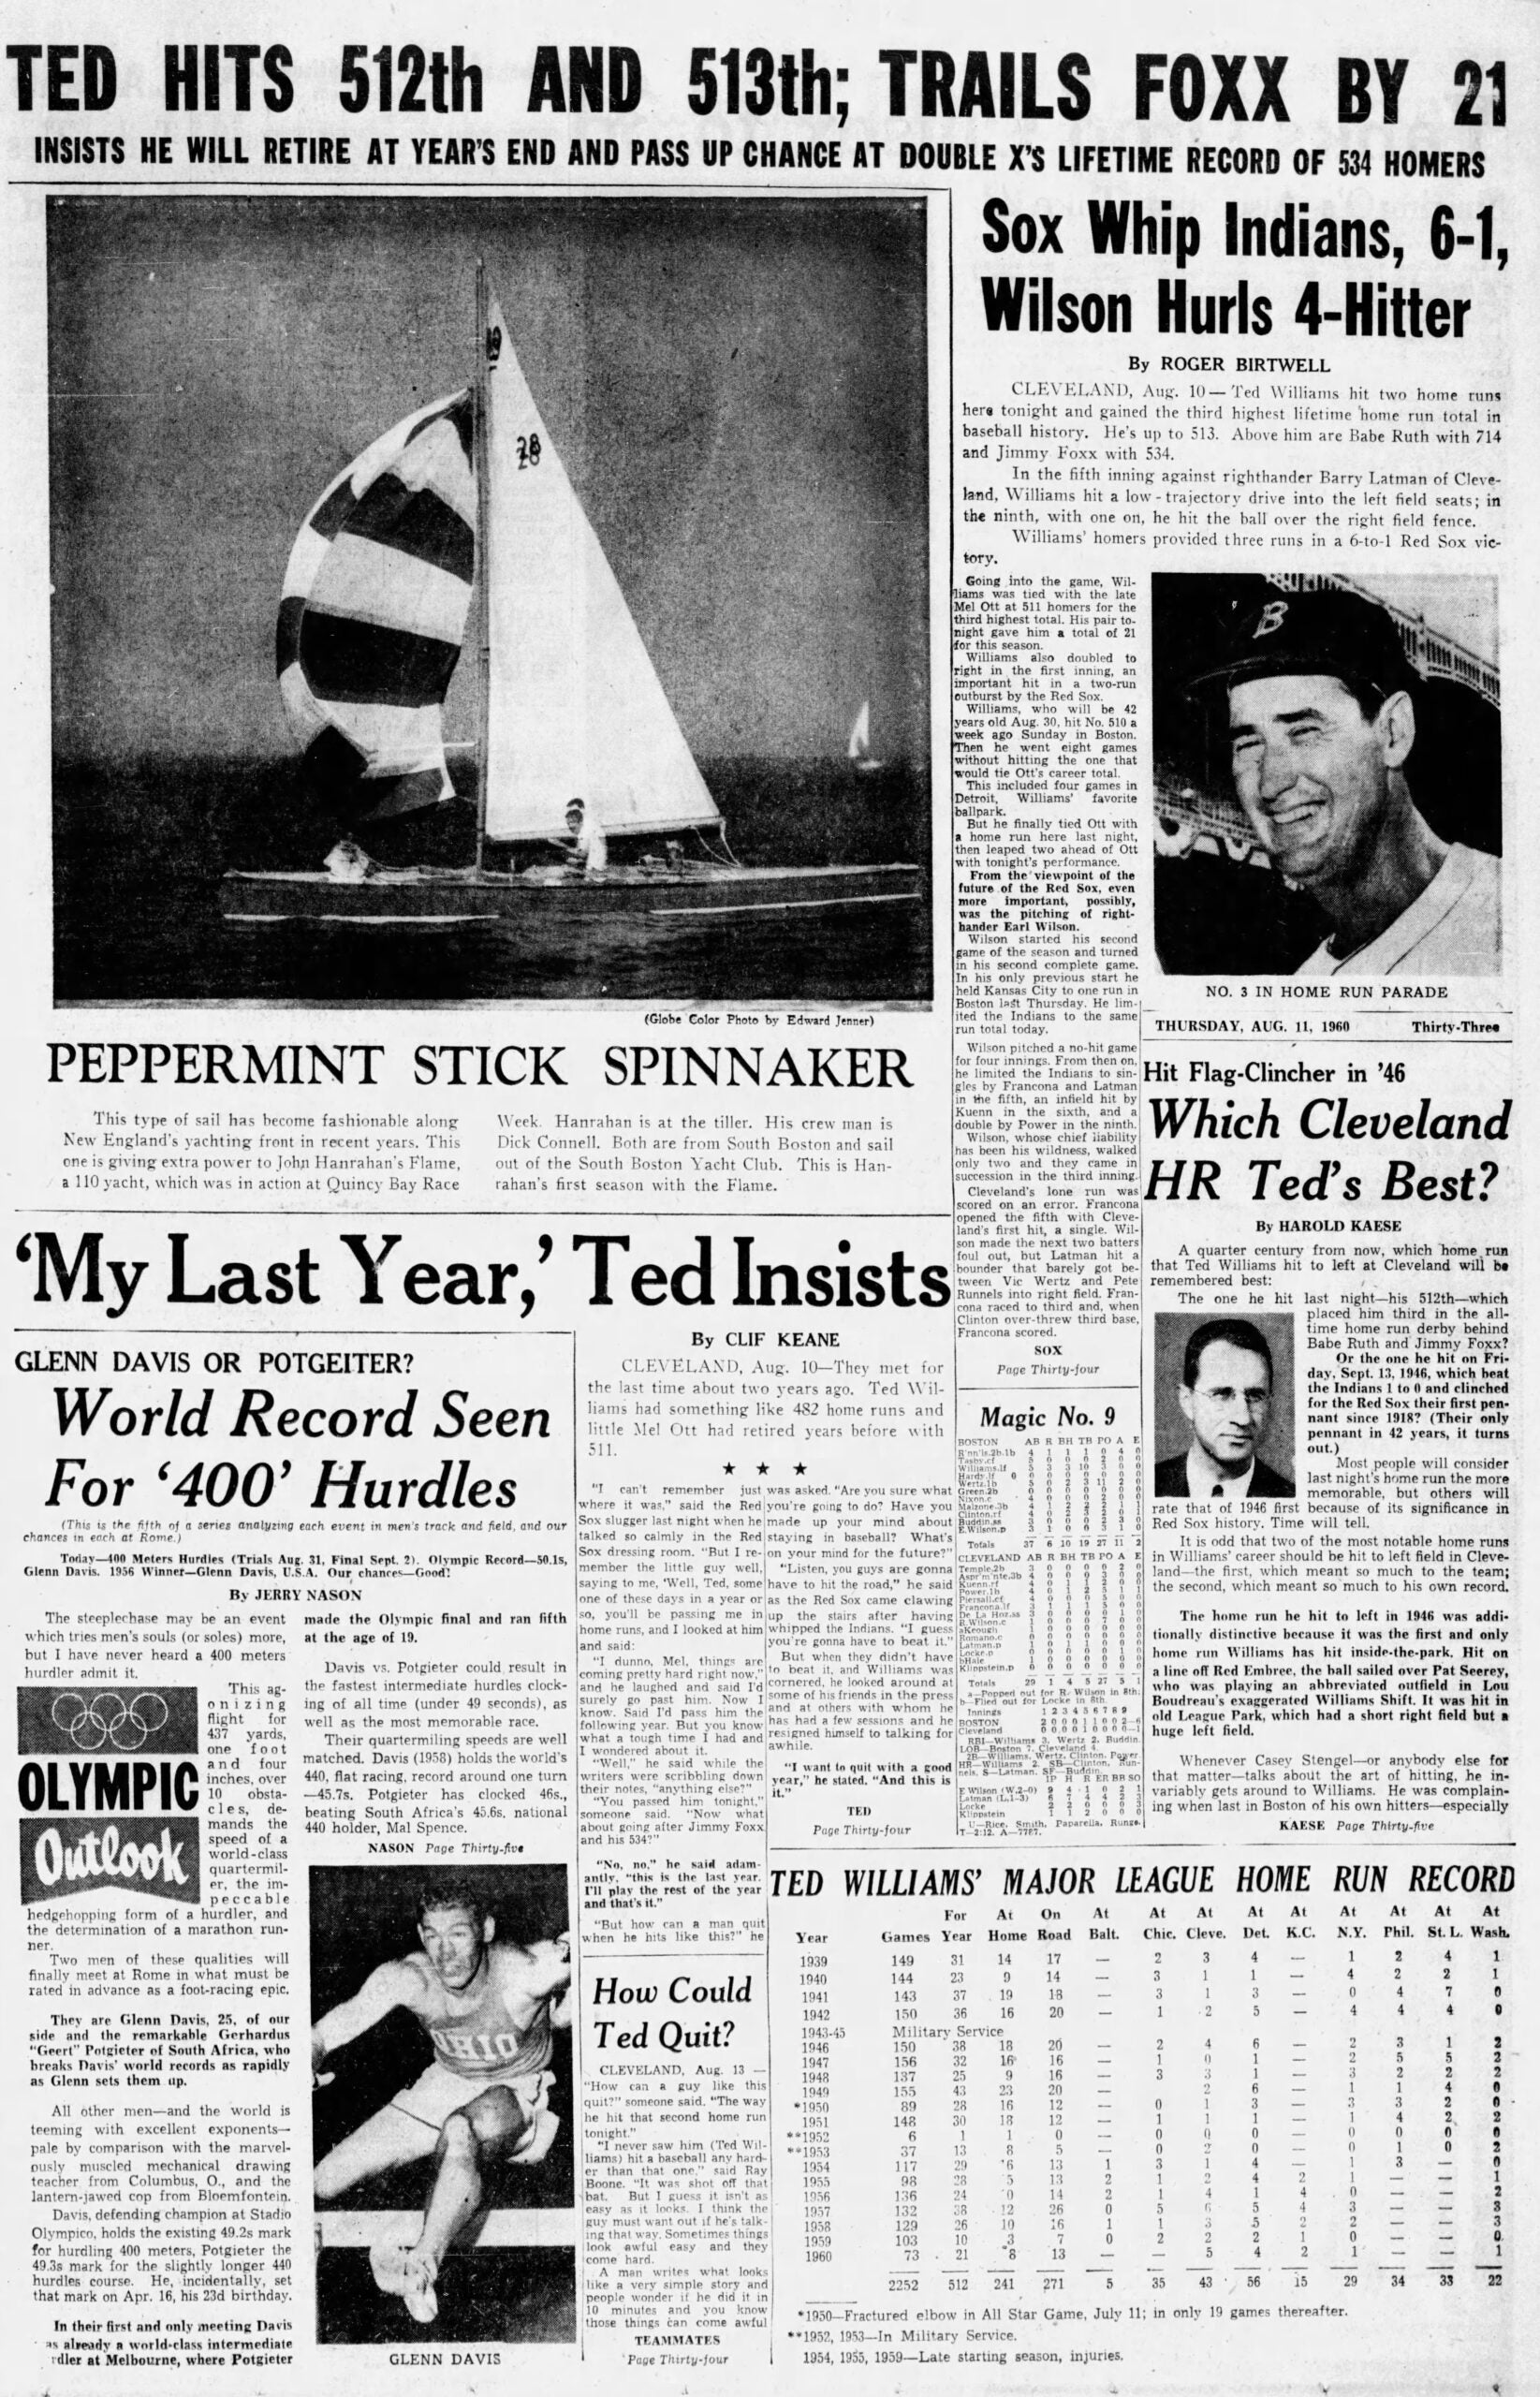 Ted Williams 1960 retirement announcement